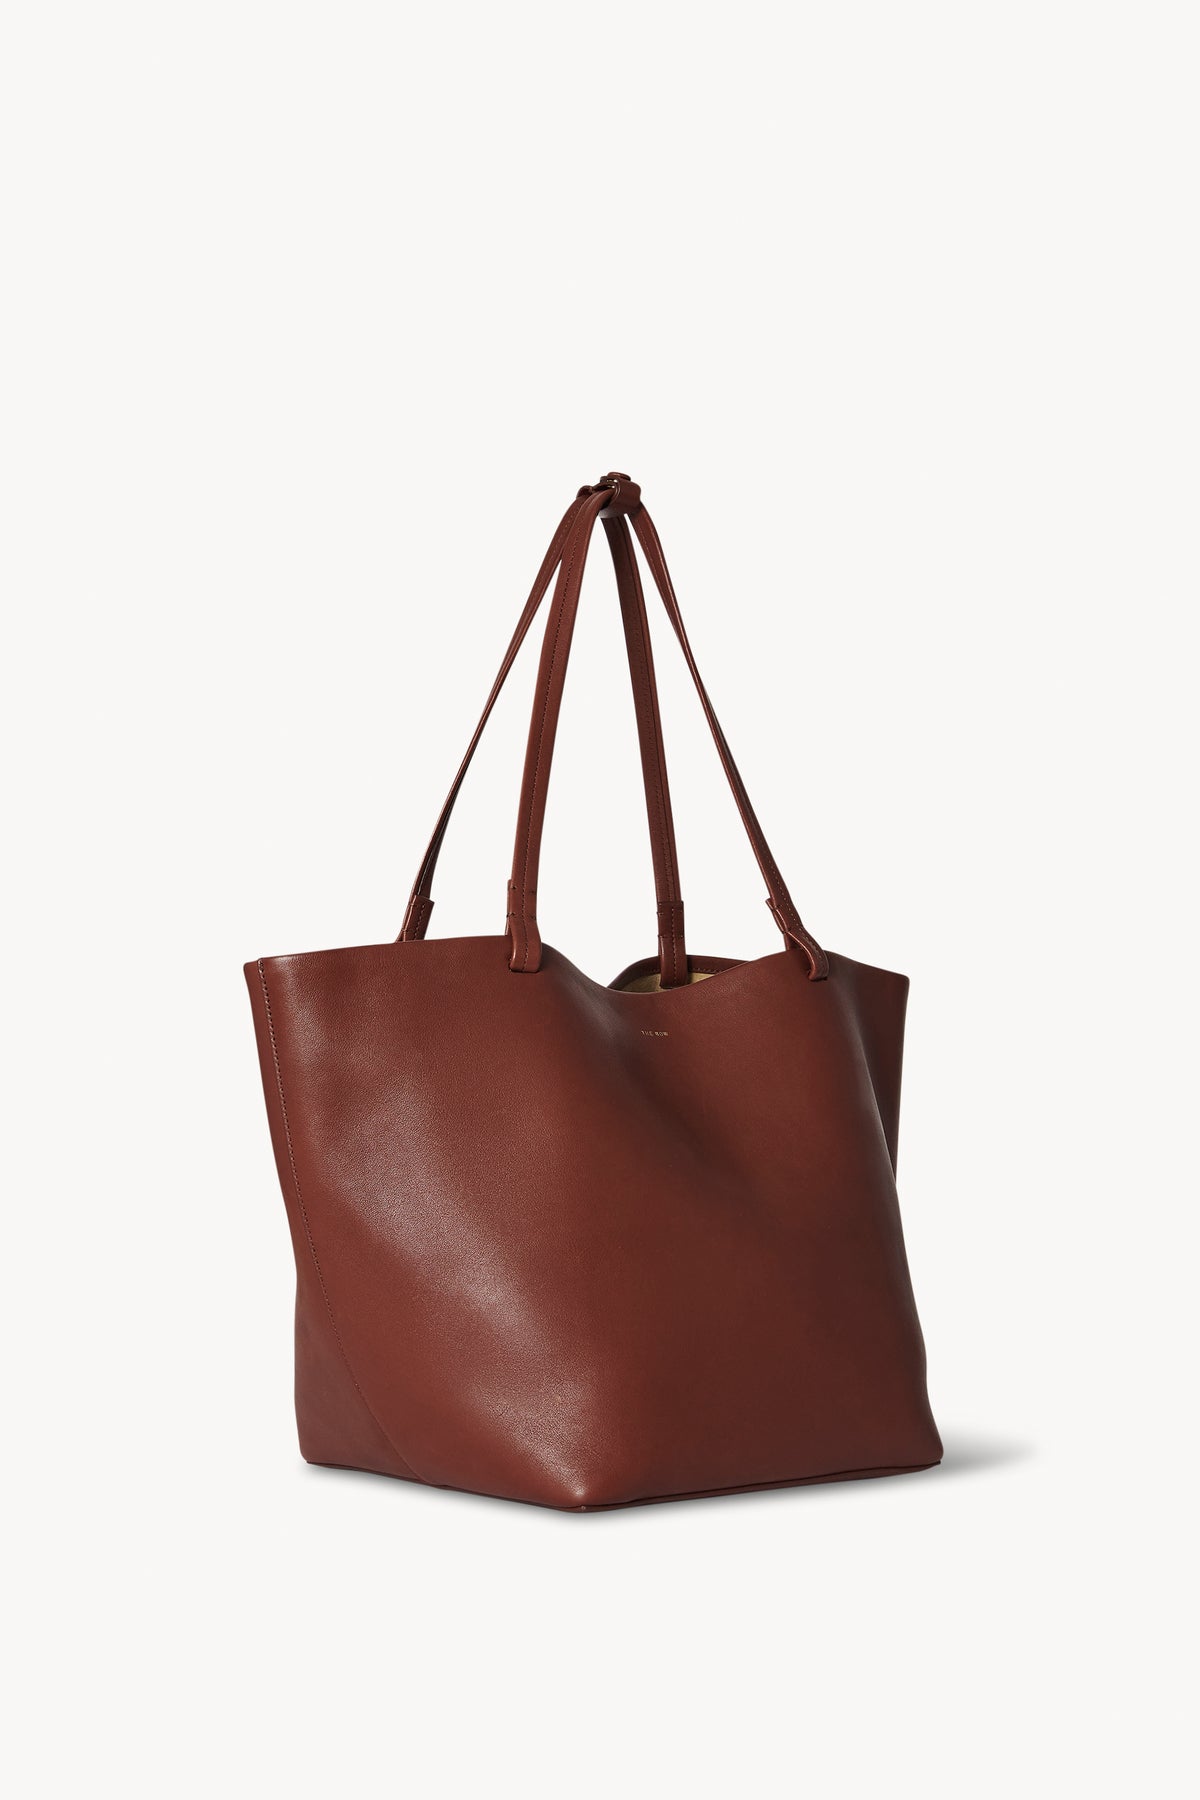 Red Leather Tote 